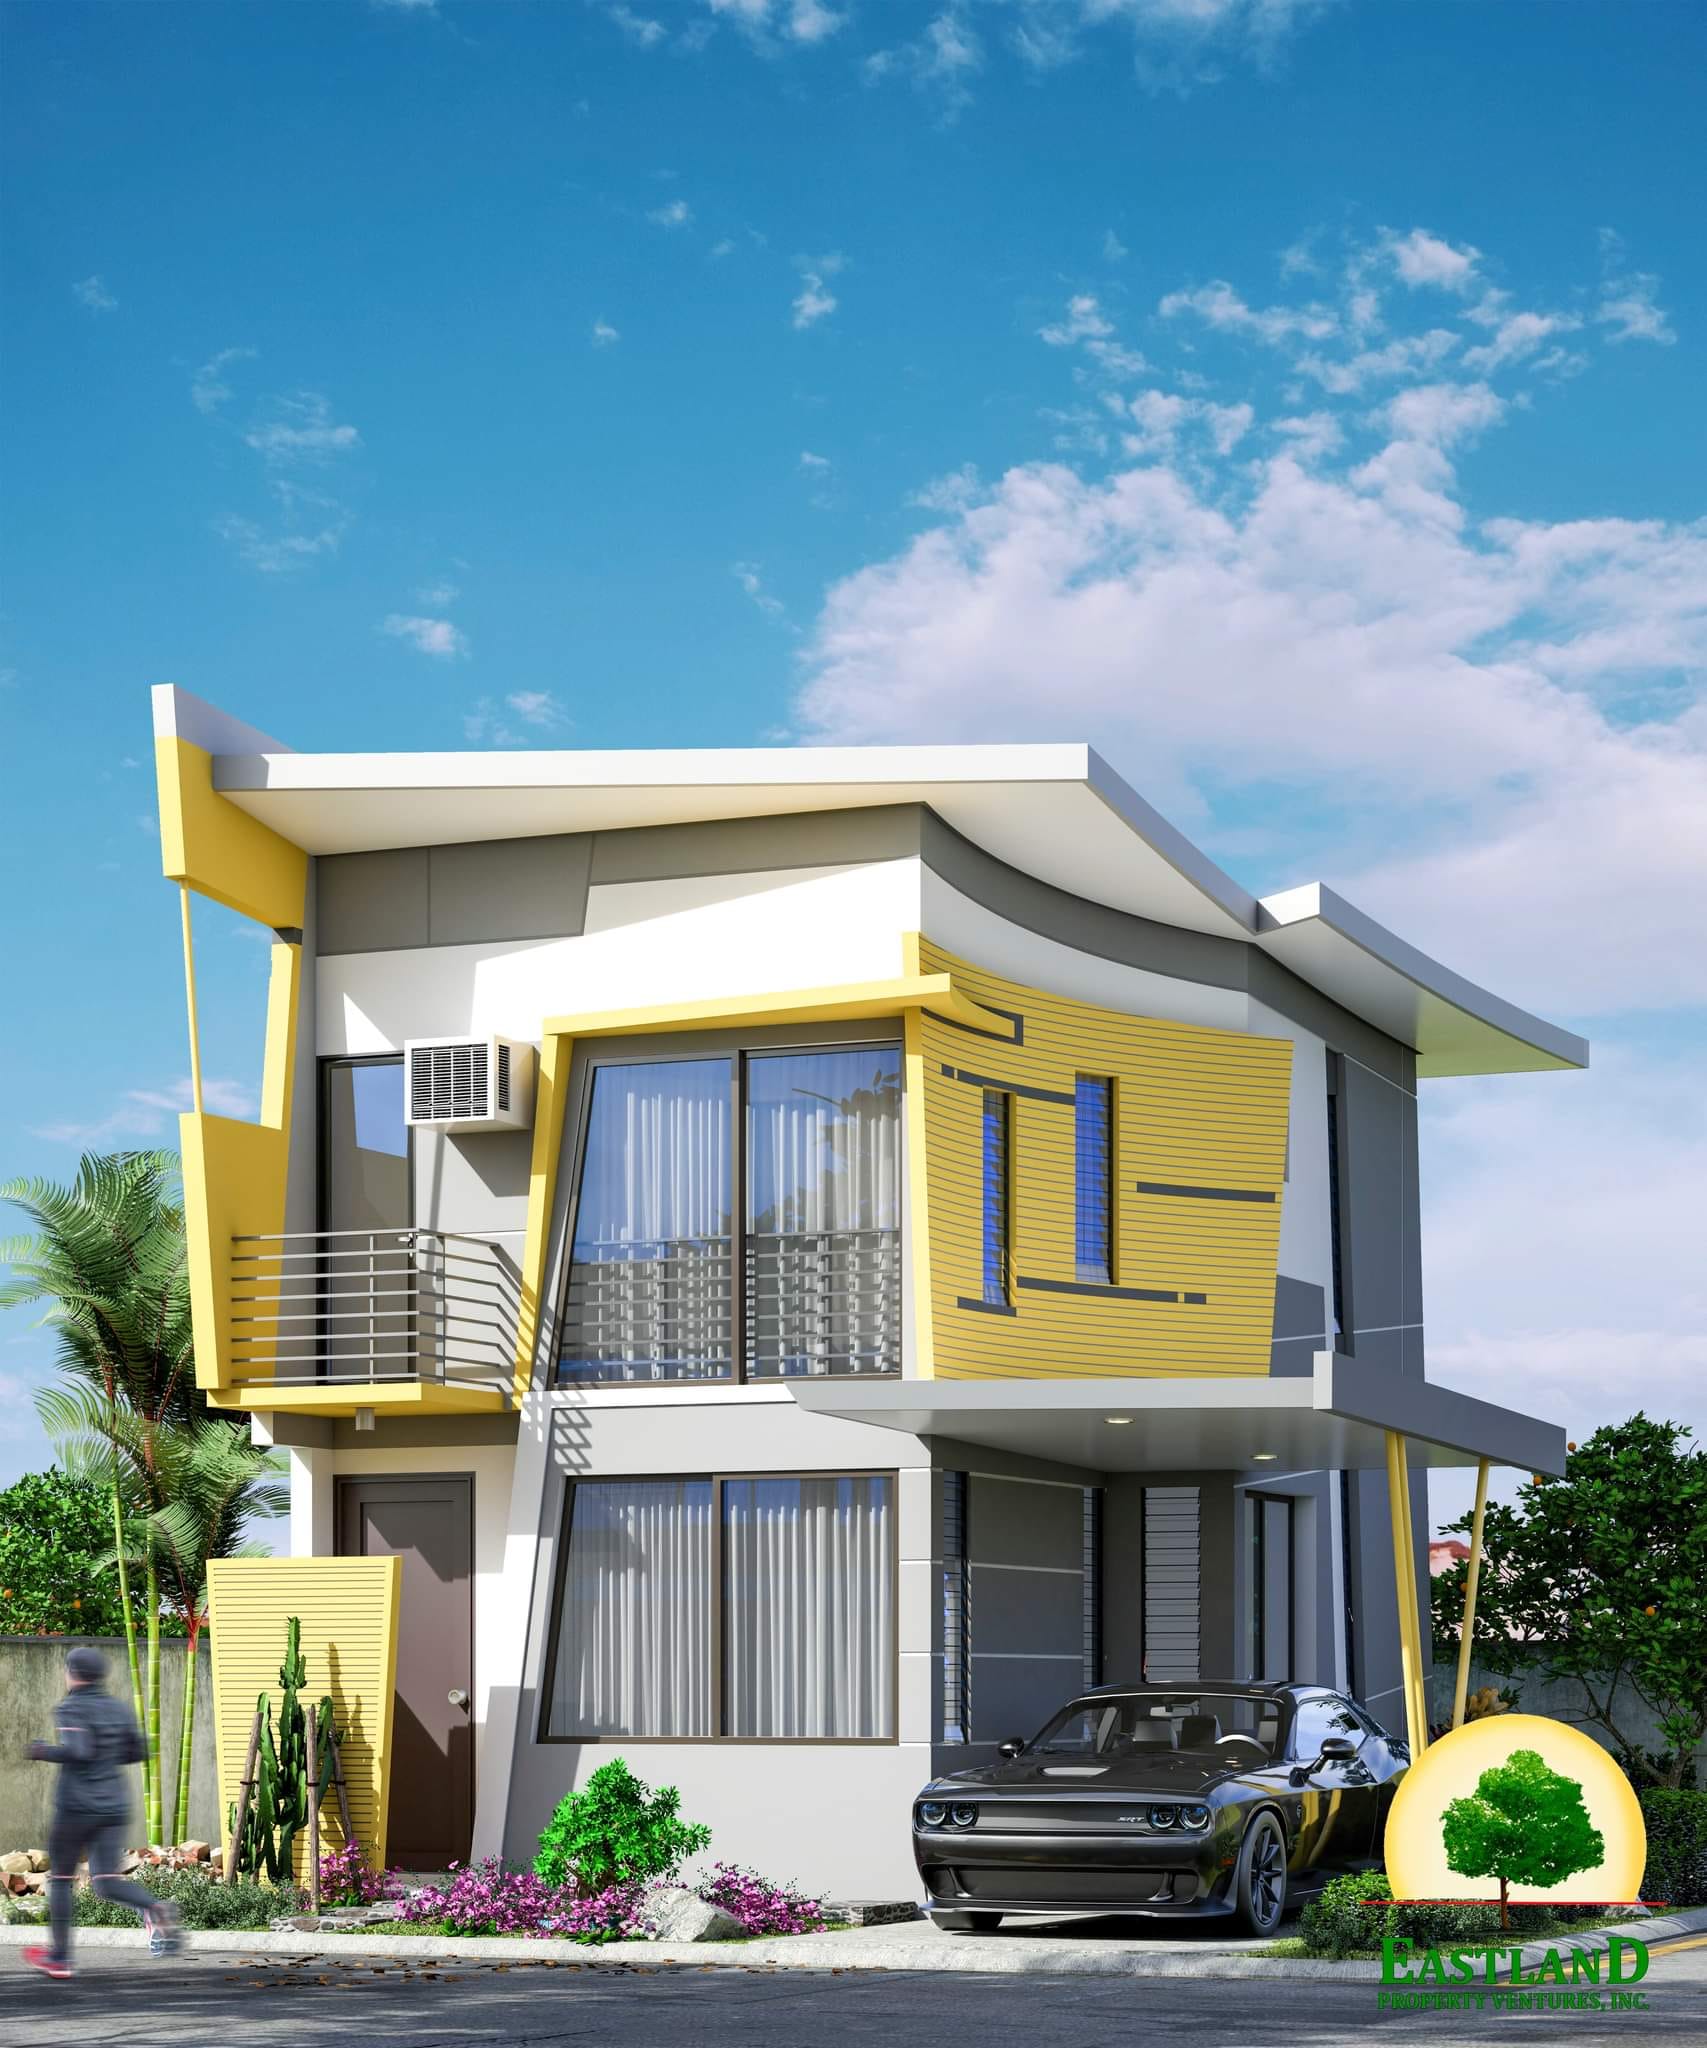 TWO STOREY SINGLE ATTACHED MARGARETTE 22 EASTLAND